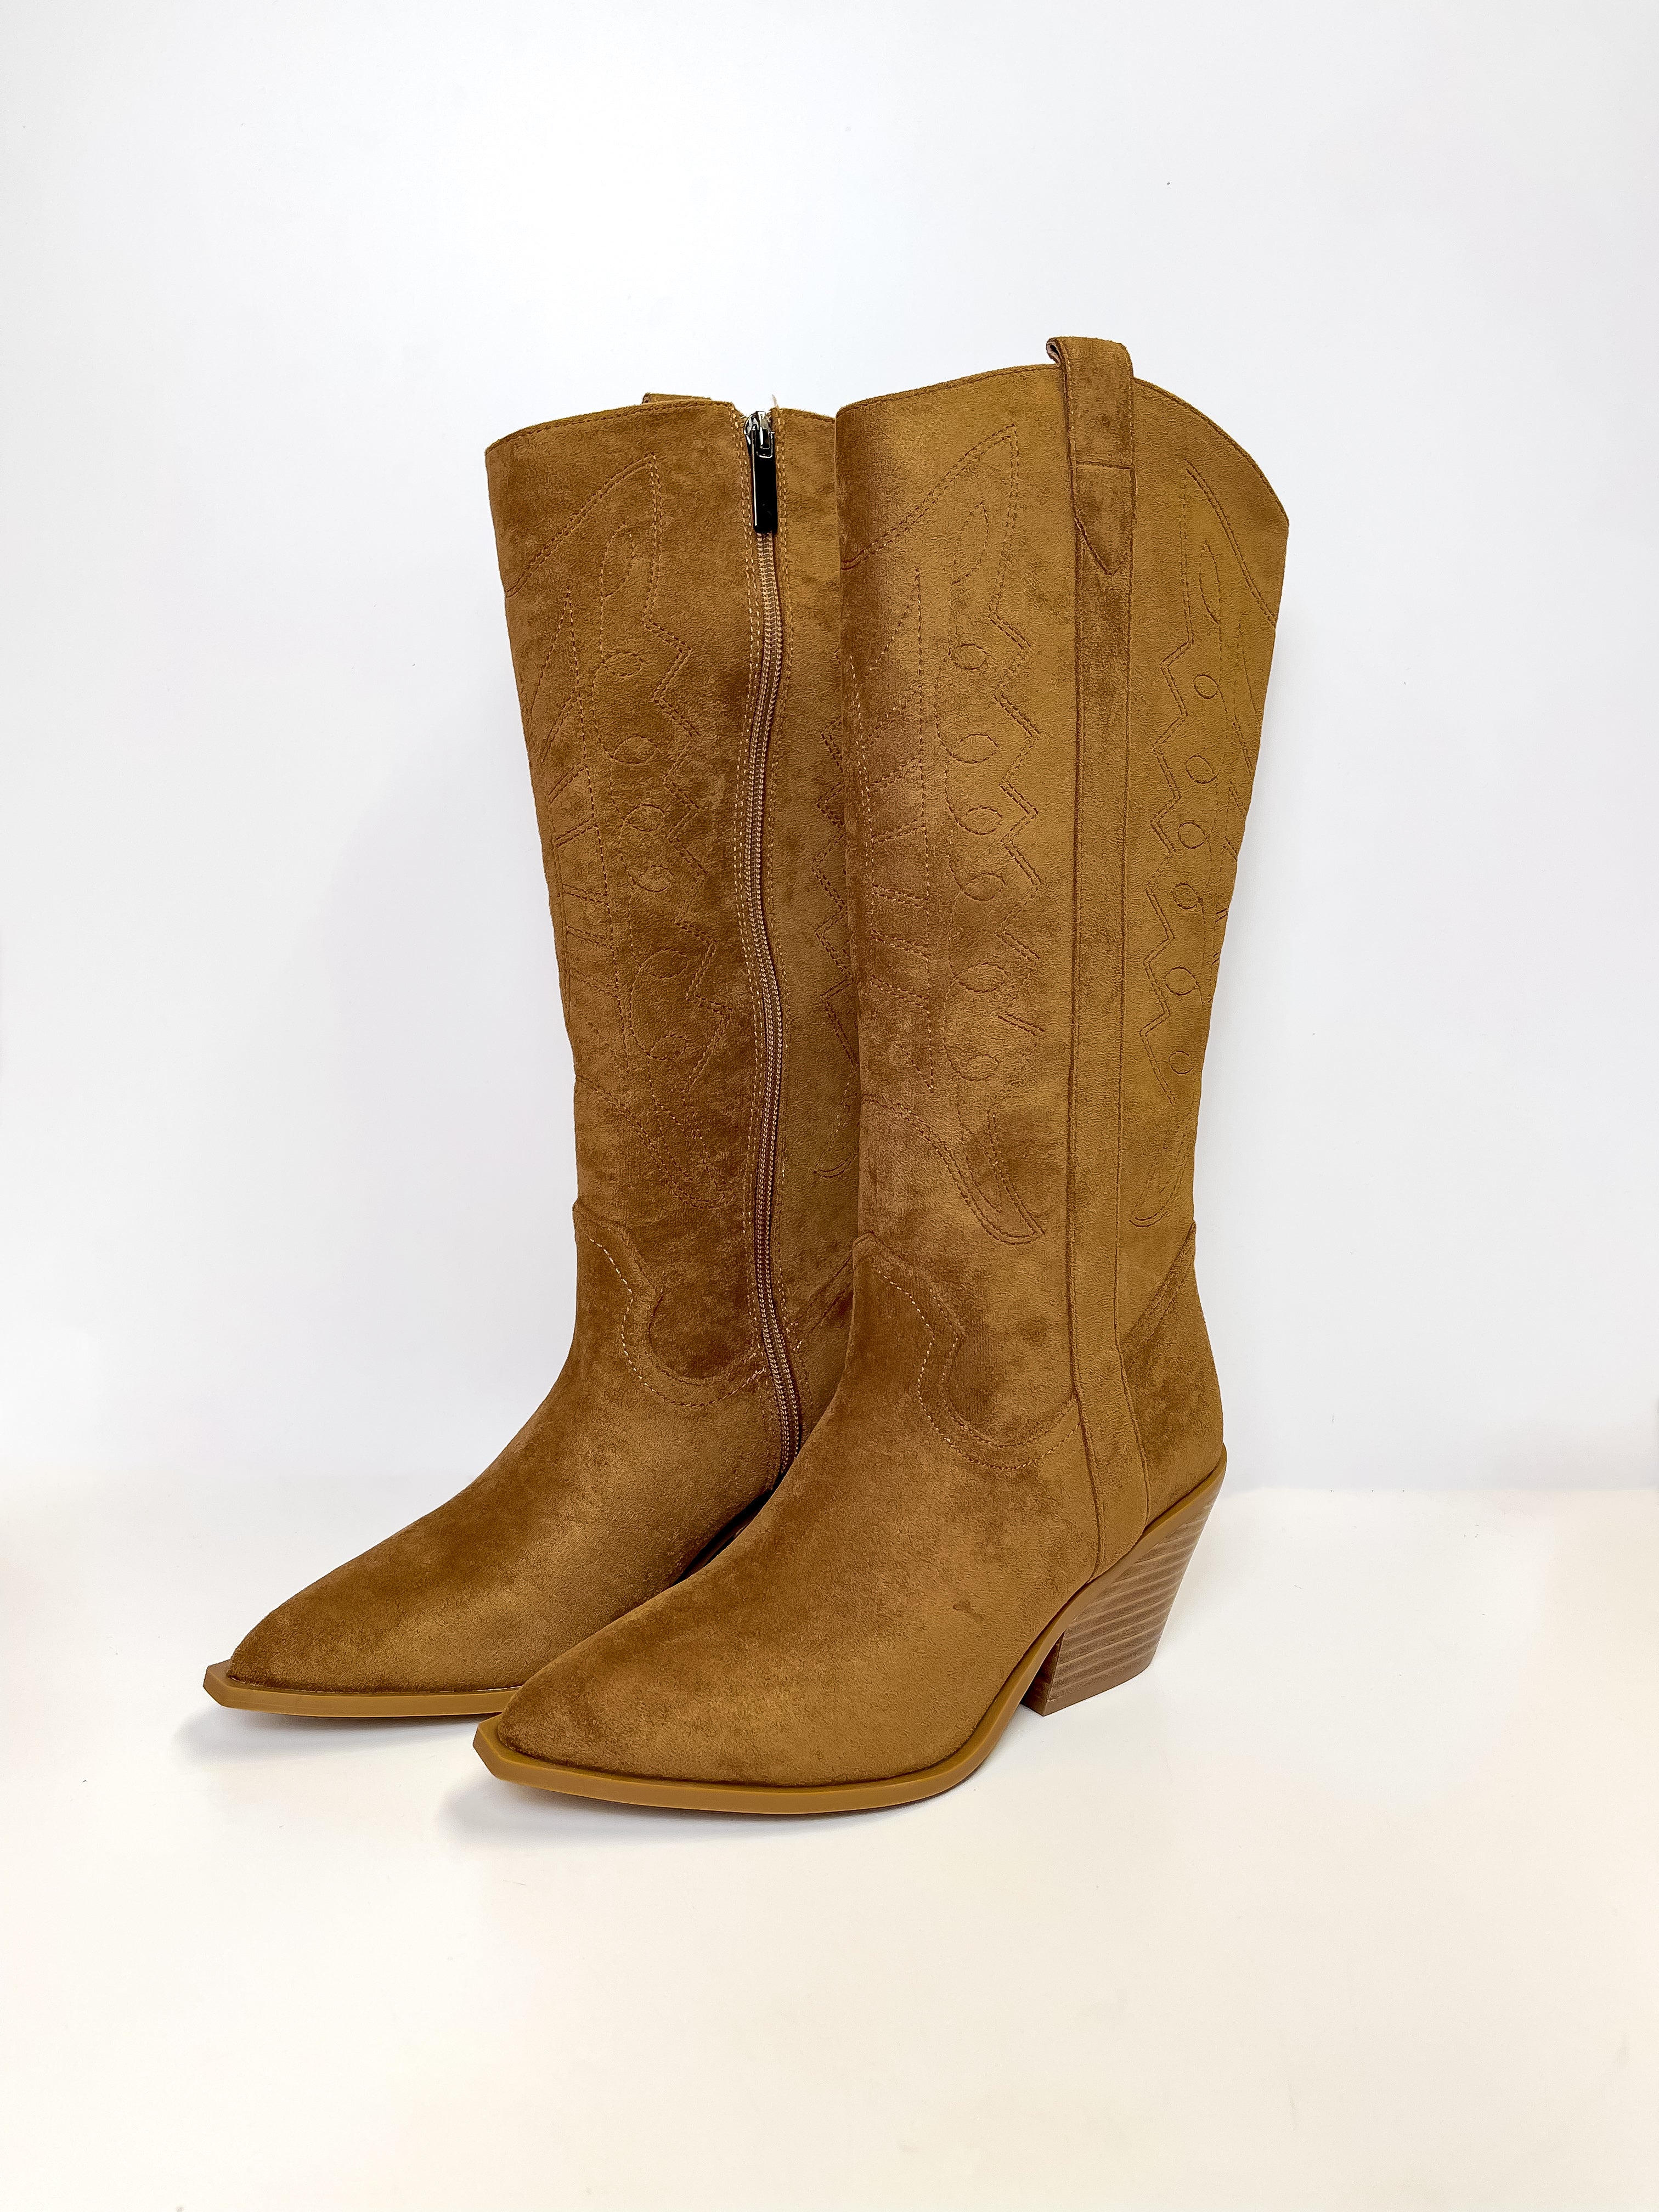 Corky's | Howdy Western Stitch Boots in Cognac Suede - Giddy Up Glamour Boutique